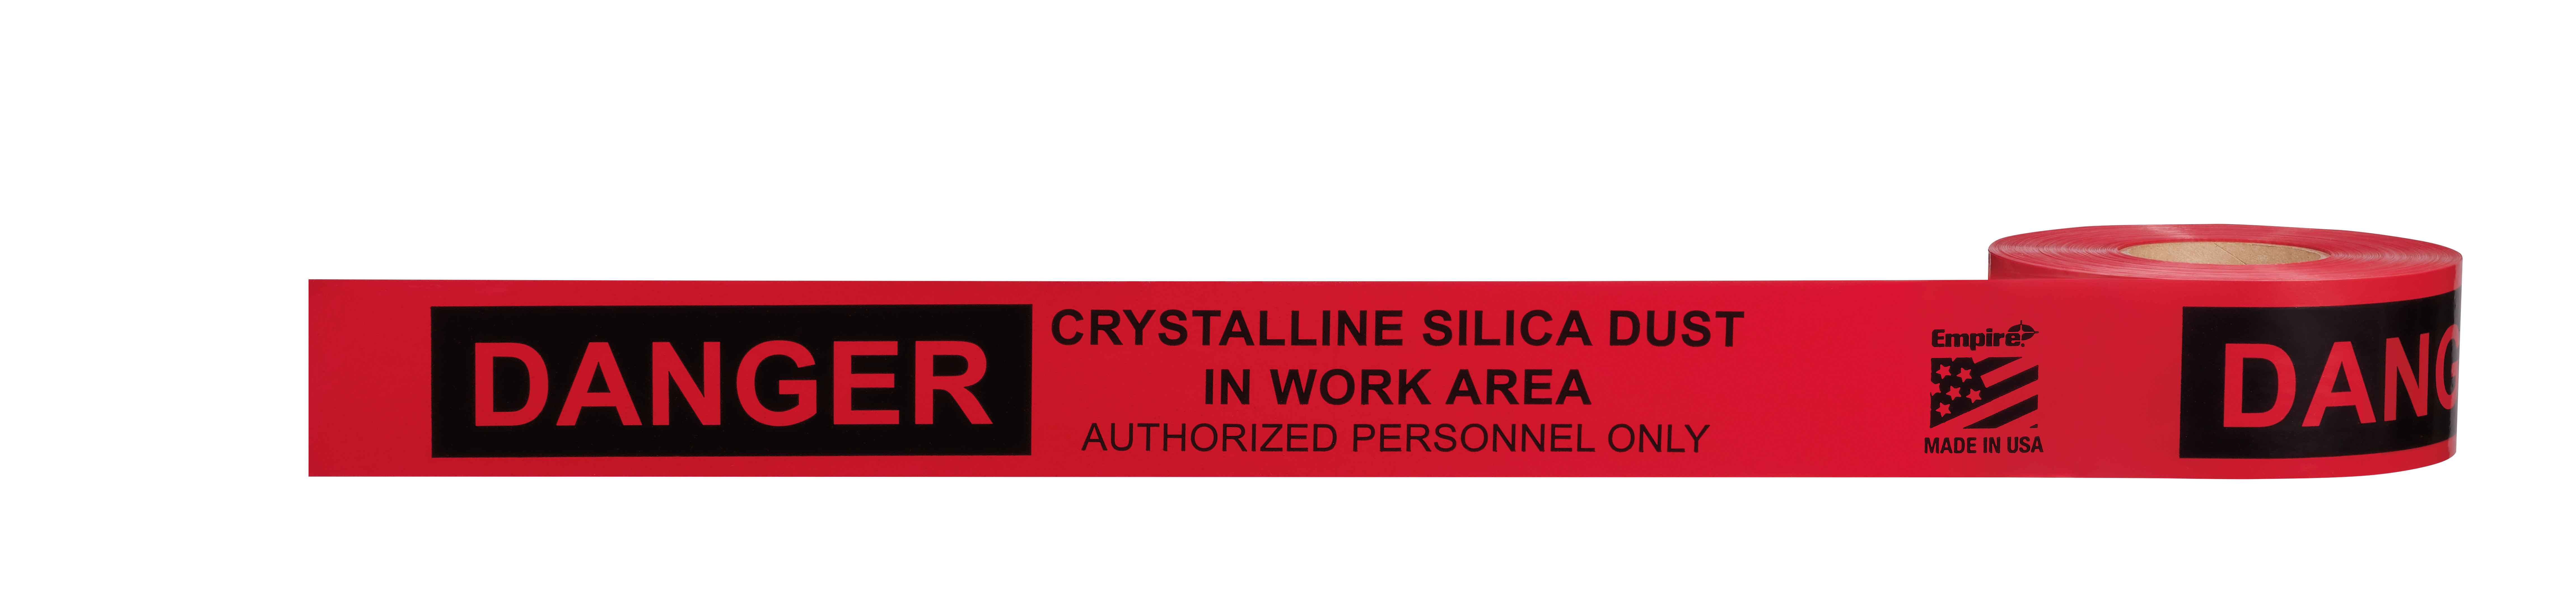 This 1000 Ft. roll lets you put up an instant warning parameter to mark dangerous construction work-in-progress, obstacles, hazards--just about anything that creates a safety risk. This roll specifically calls out the dangers of crystalline silica dust to ensure hazardous area is marked off and appropriate personal protection equipment is worn by anyone who is within the work area. Empire Level is the leading designer and producer of levels, squares, layout tools and caution tape in the United States with dominant market share in the retail, contractor supply, and do-it-yourself markets.